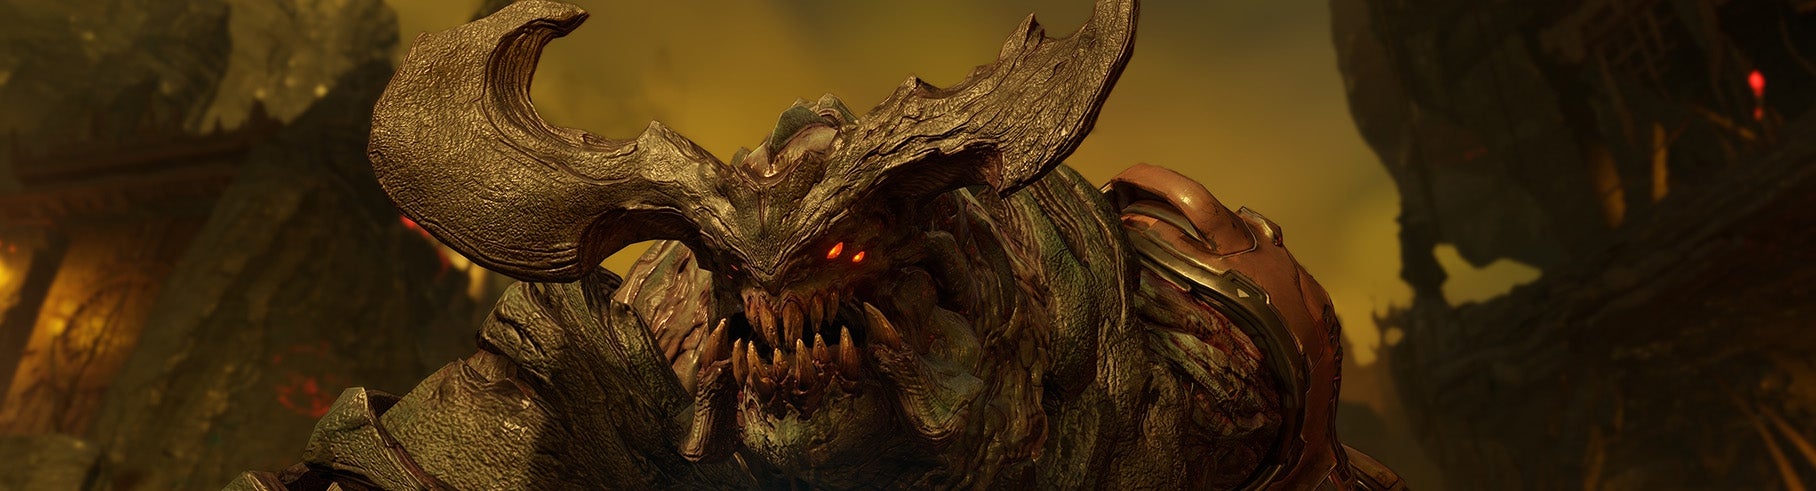 Image for Doom PS4 Review: The Beast is Back